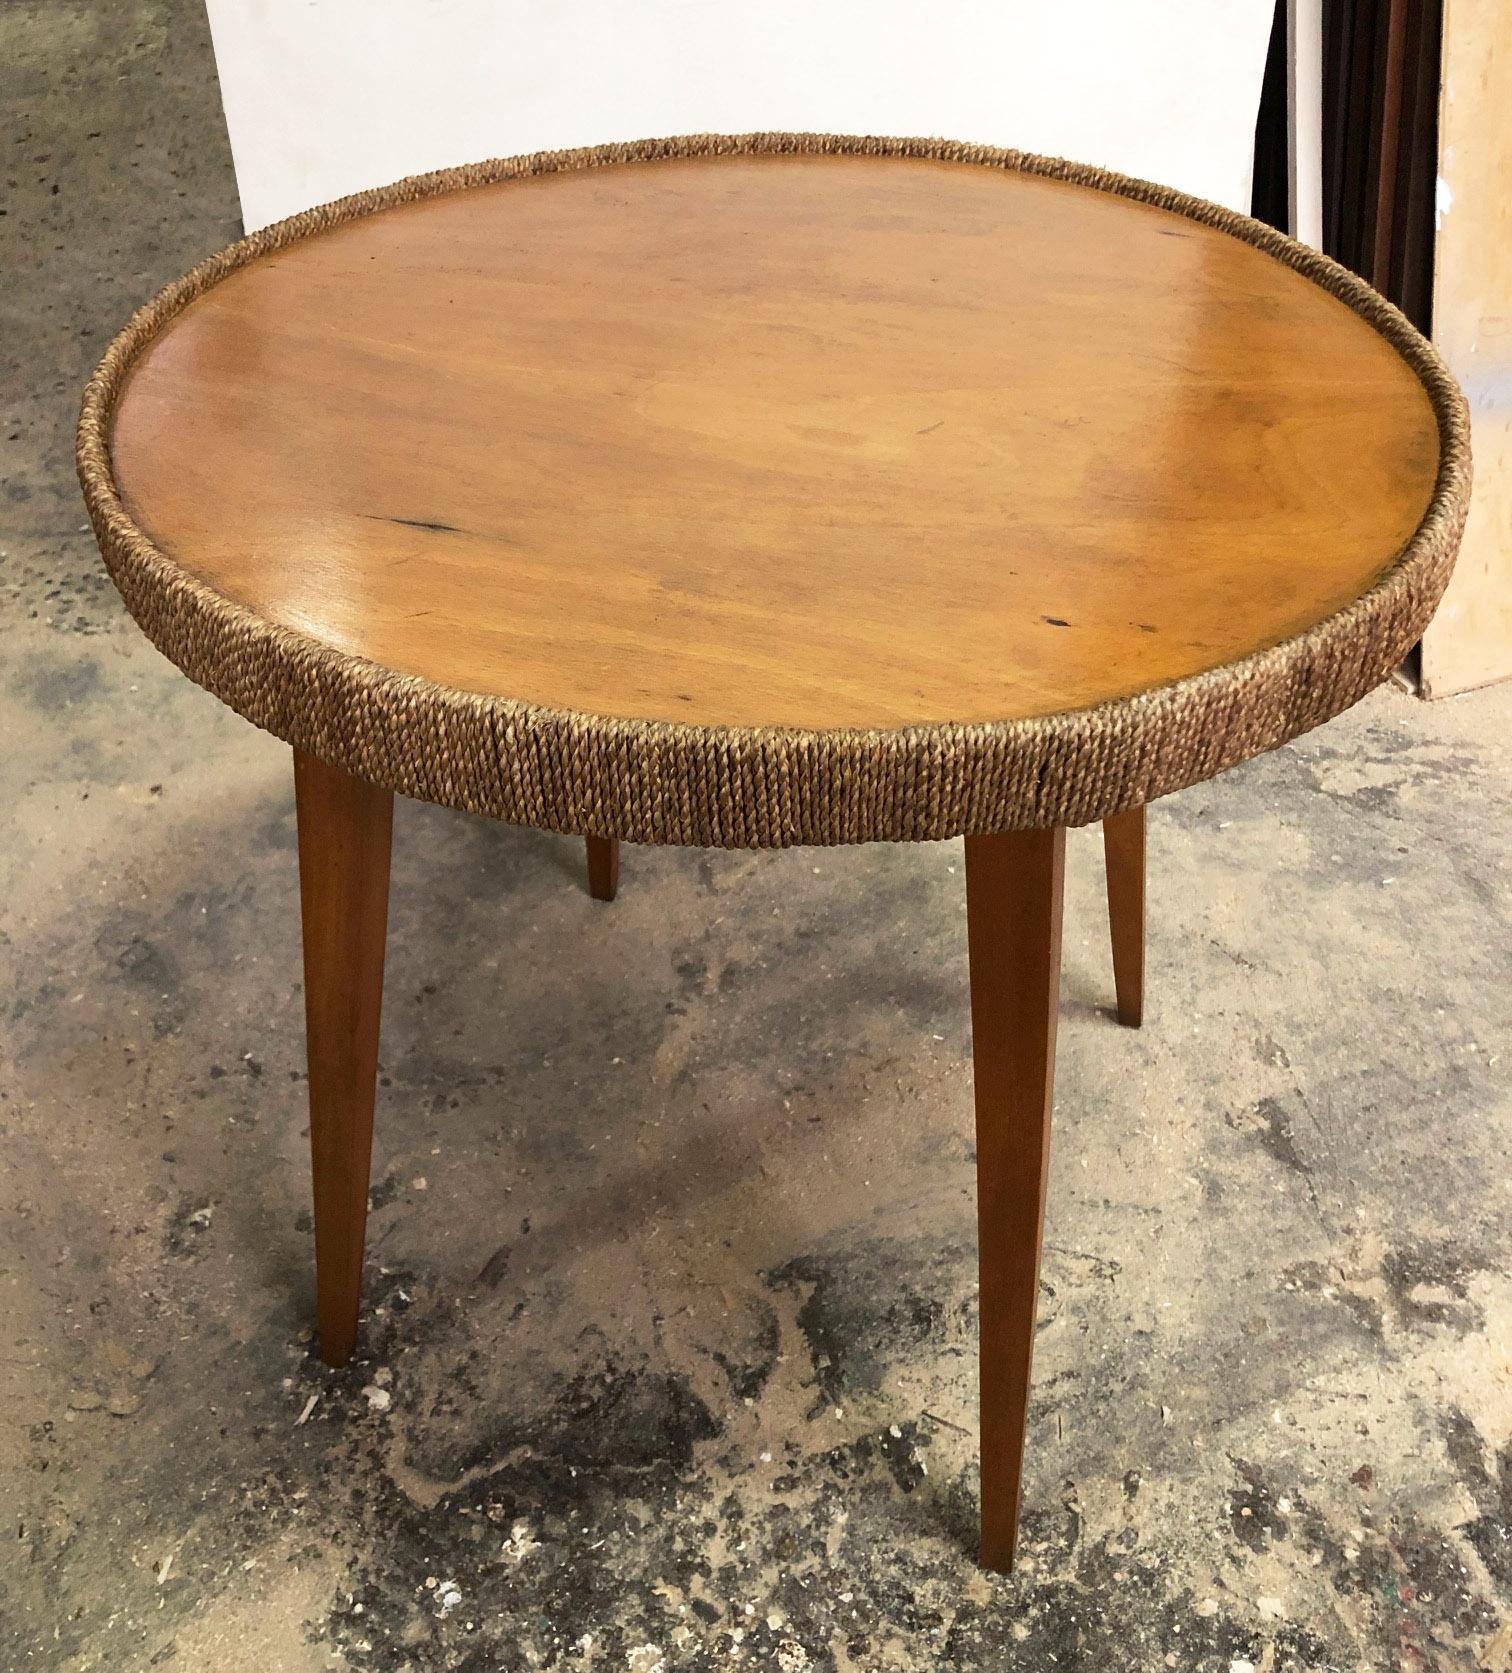 Italian sofa table from 1970s, in beechwood, round with rope edge trim, very elegant.
The transport quote for the USA and Canada is customized according to the destination, make the request with zip code and city.